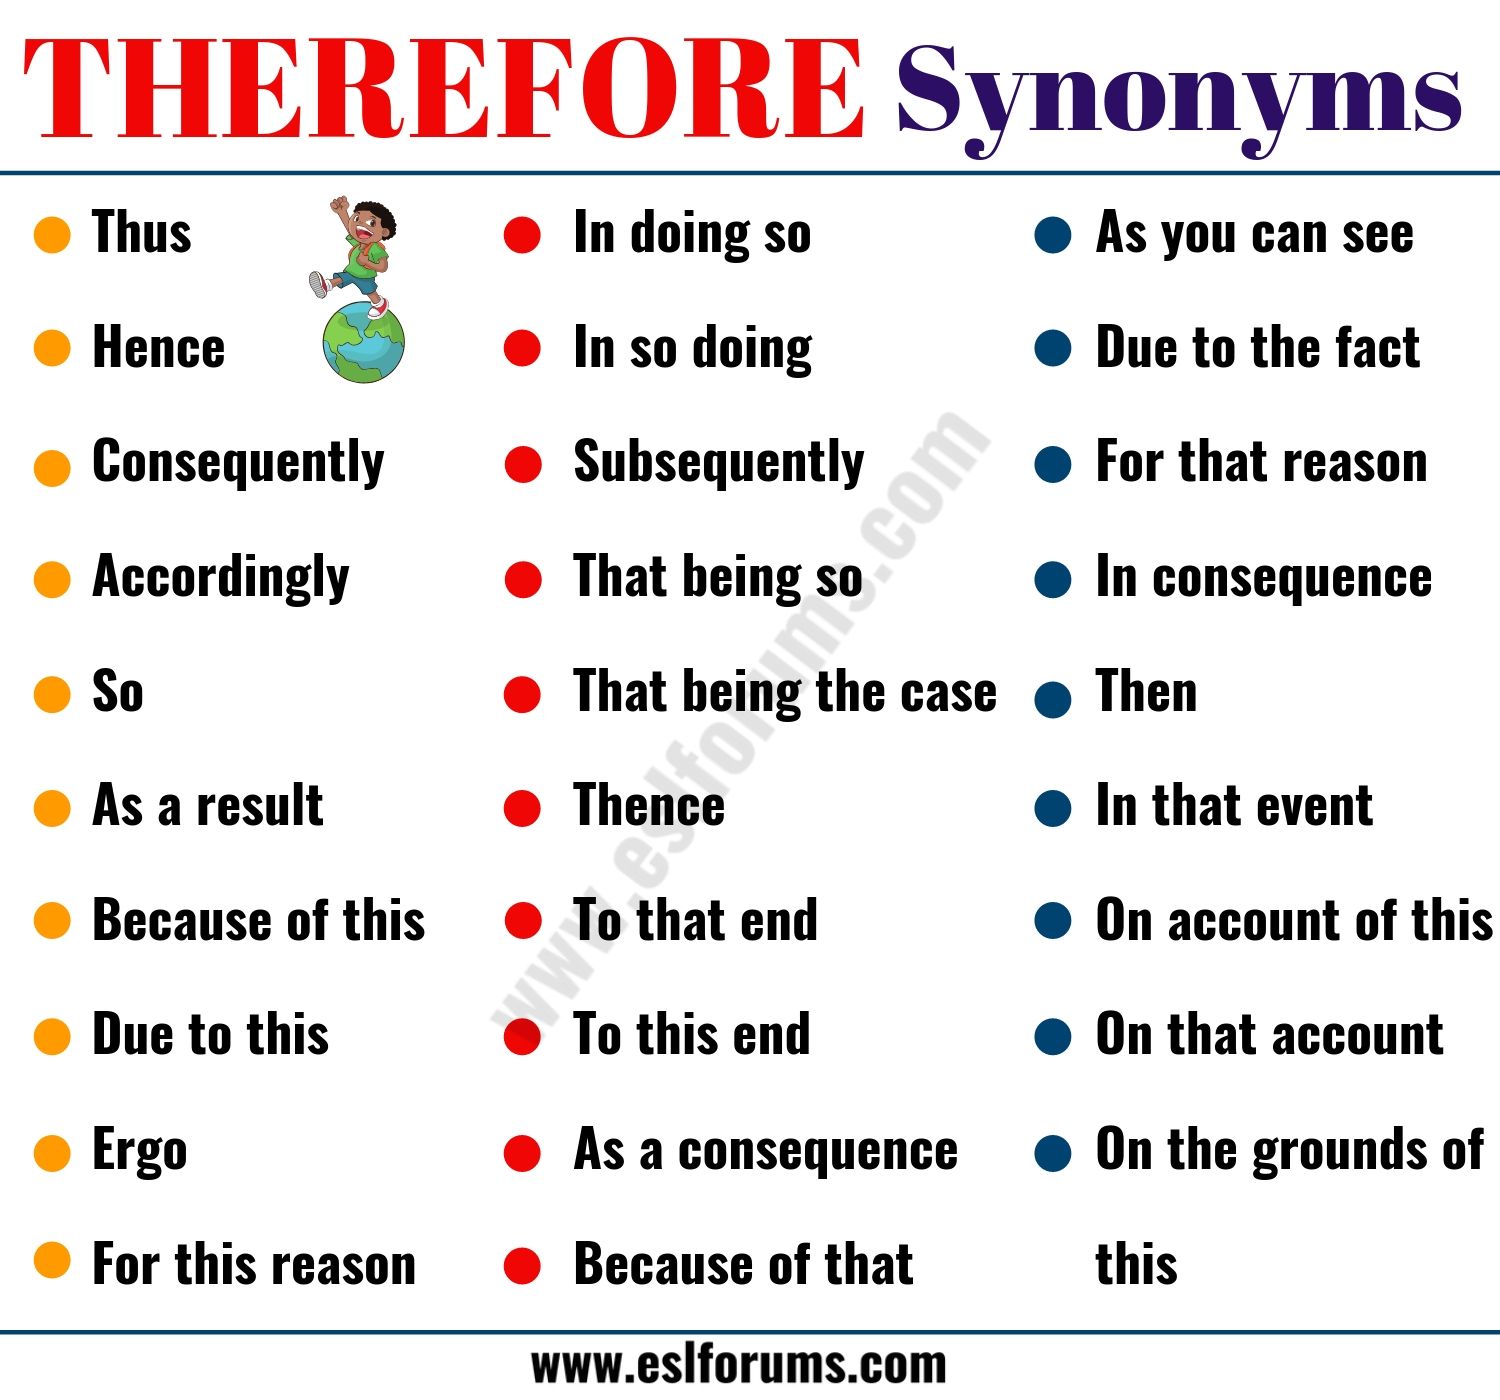 by doing this synonym